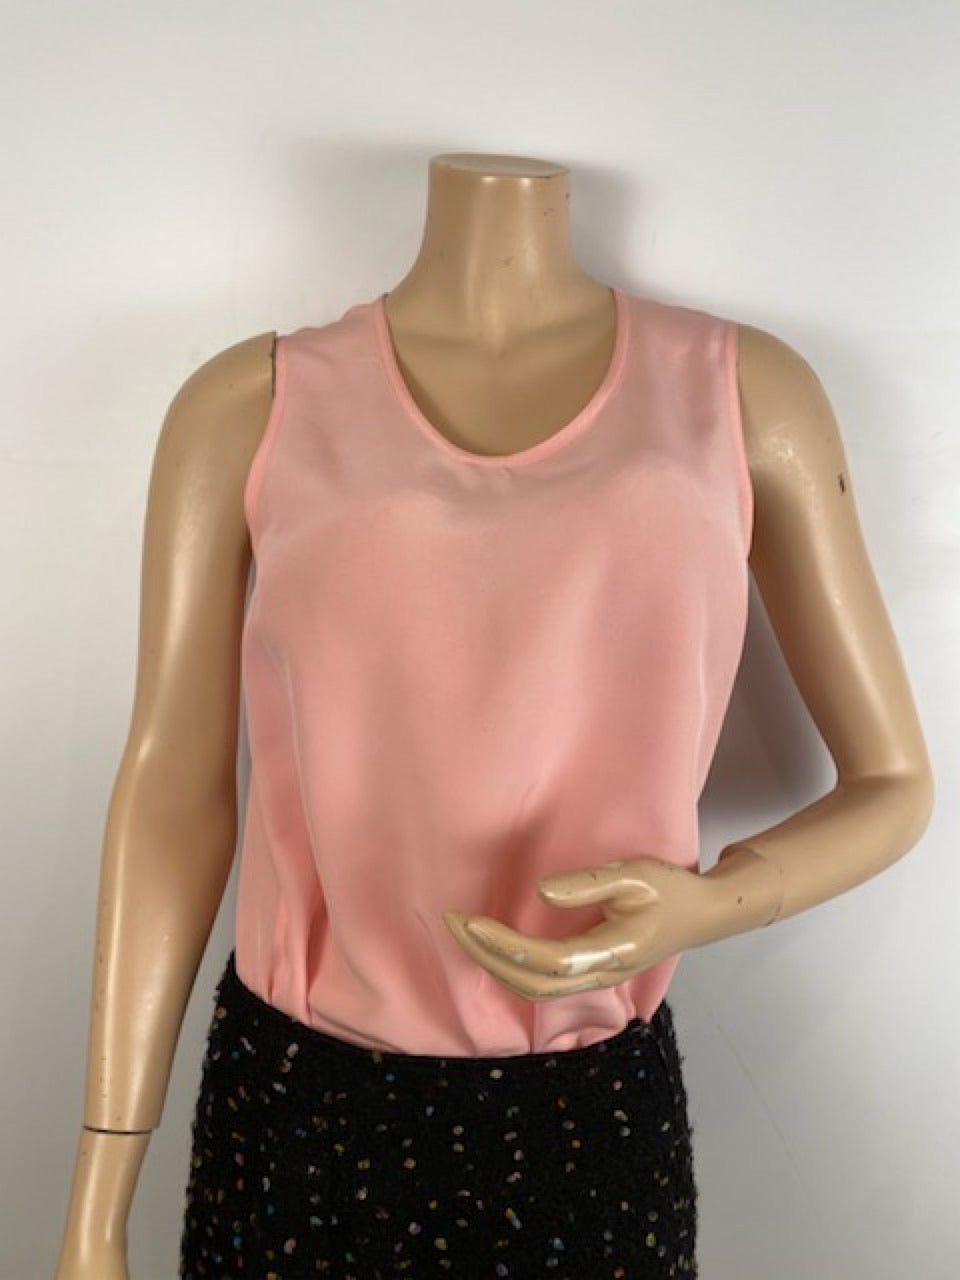 Vintage Chanel Pink Camisole Shell Blouse US 8/10 – HelensChanel